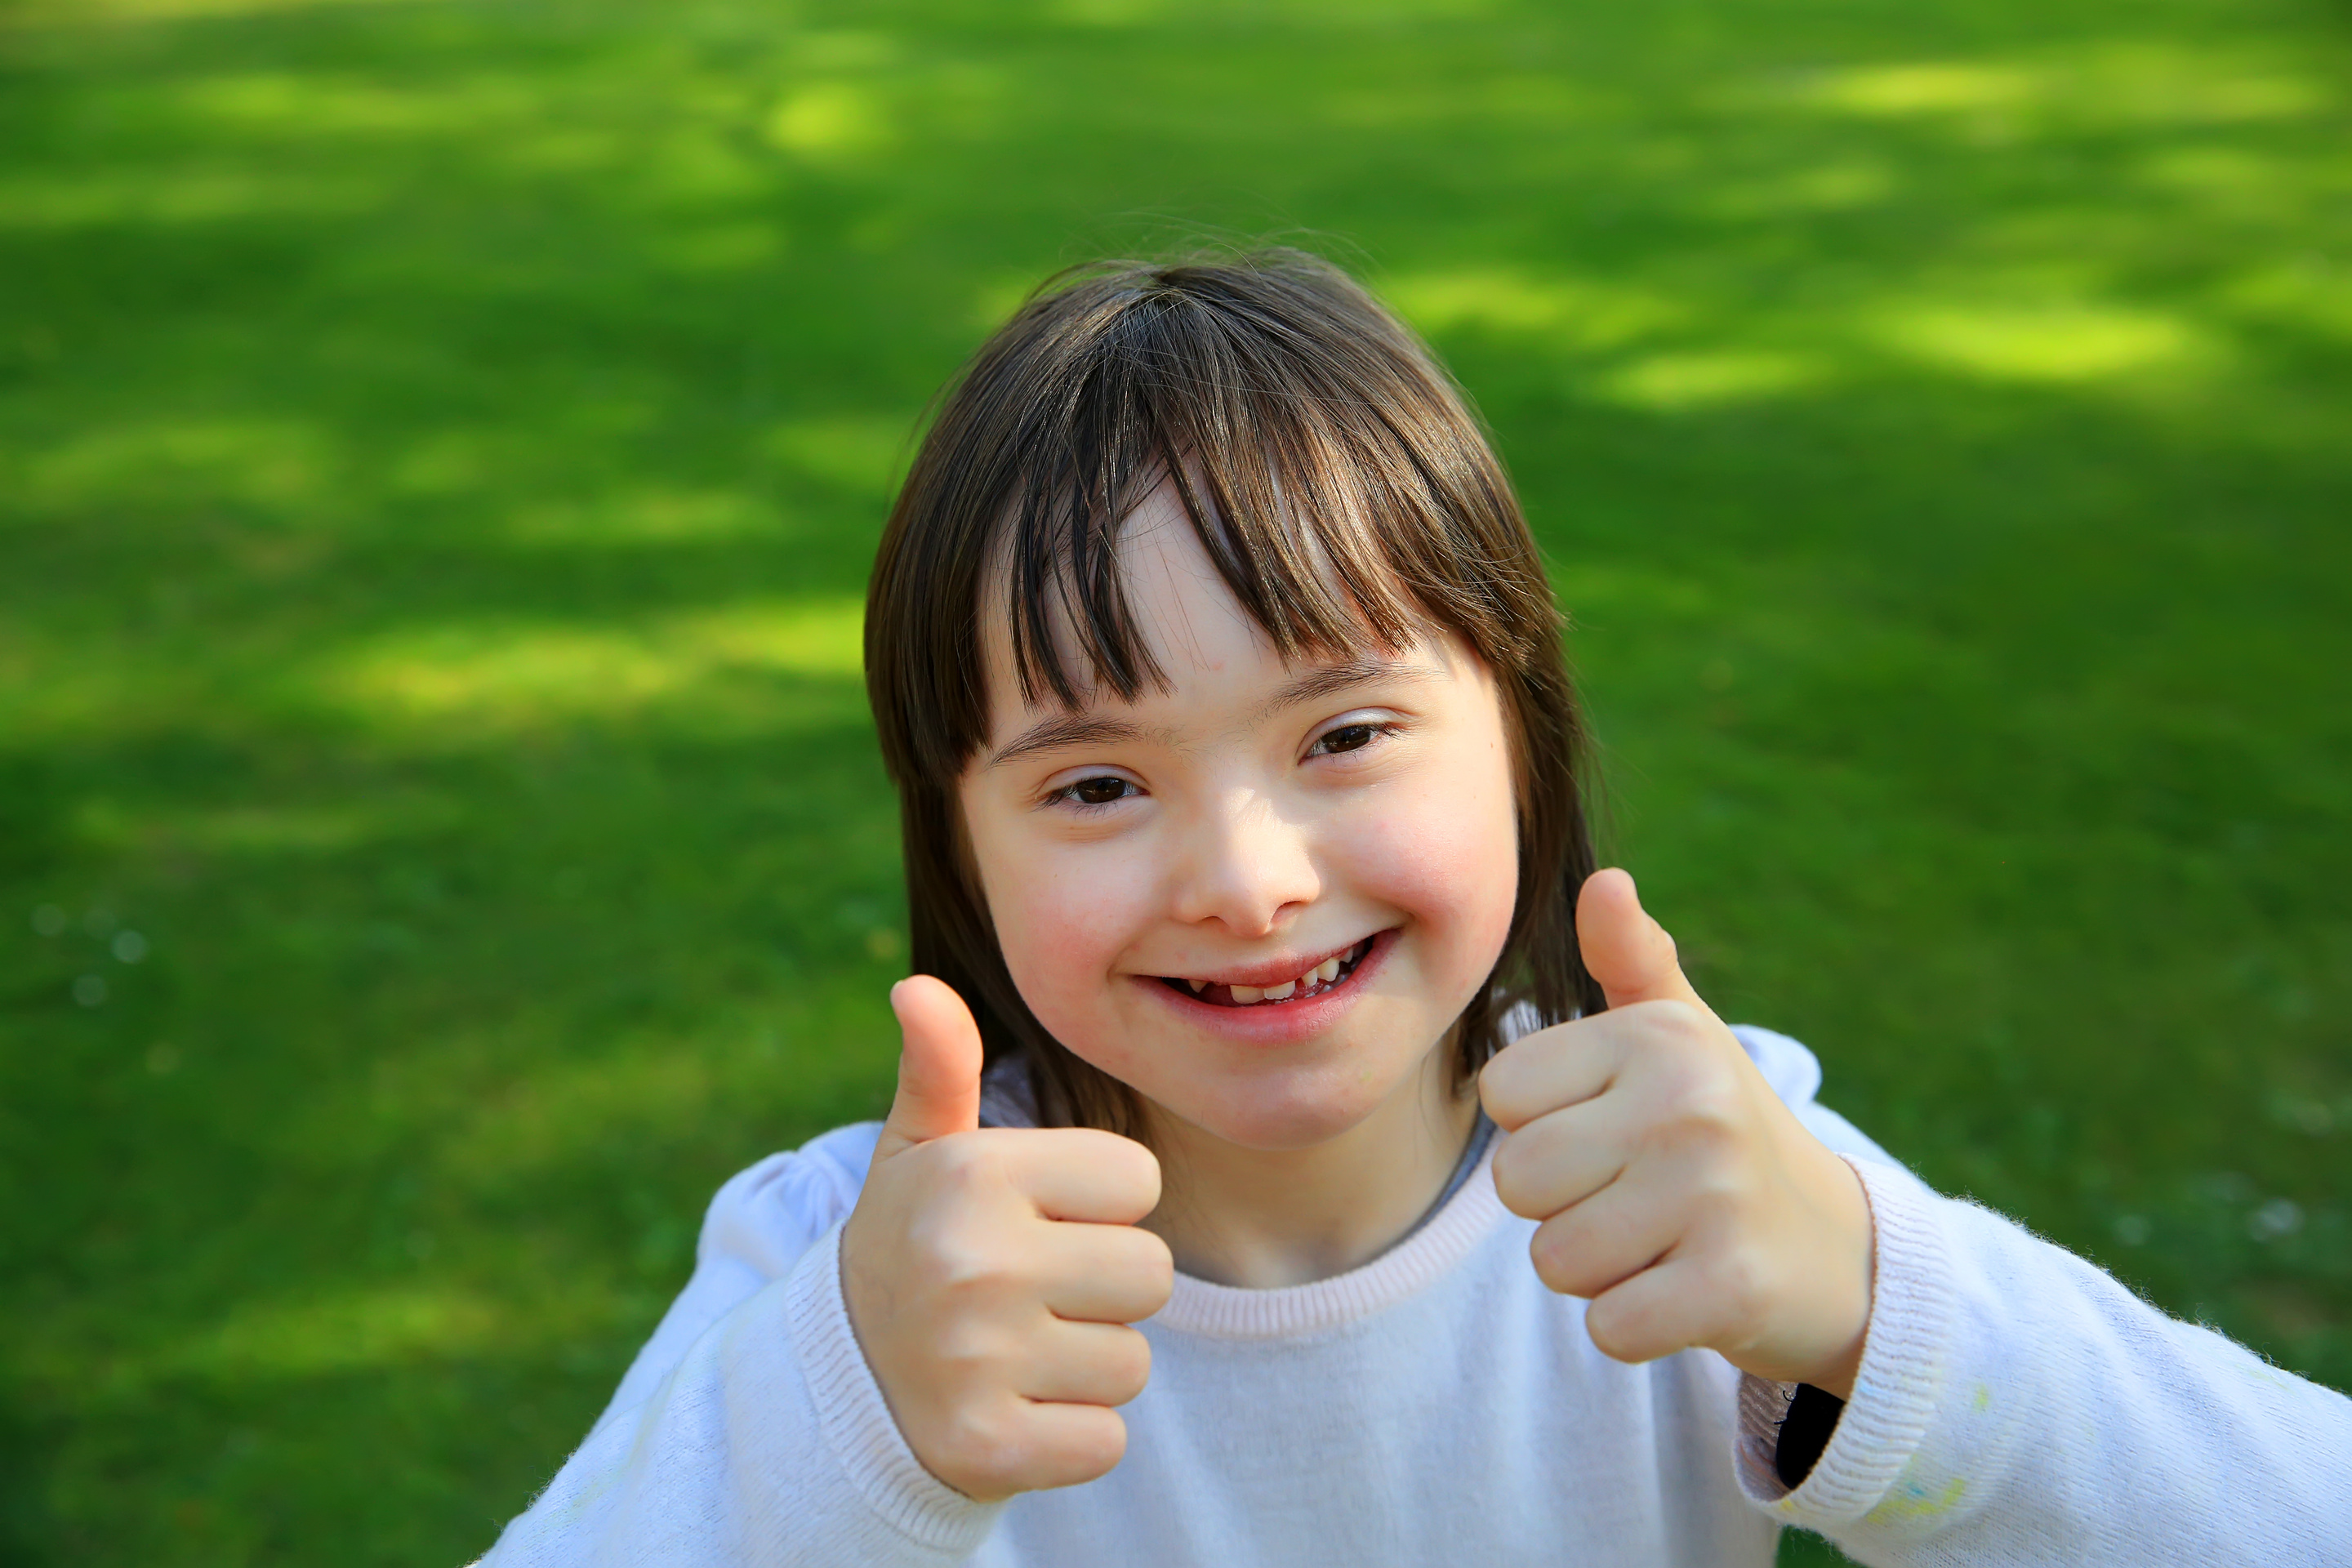 Portrait of a Girl with Down Syndrome Smiling in the Park